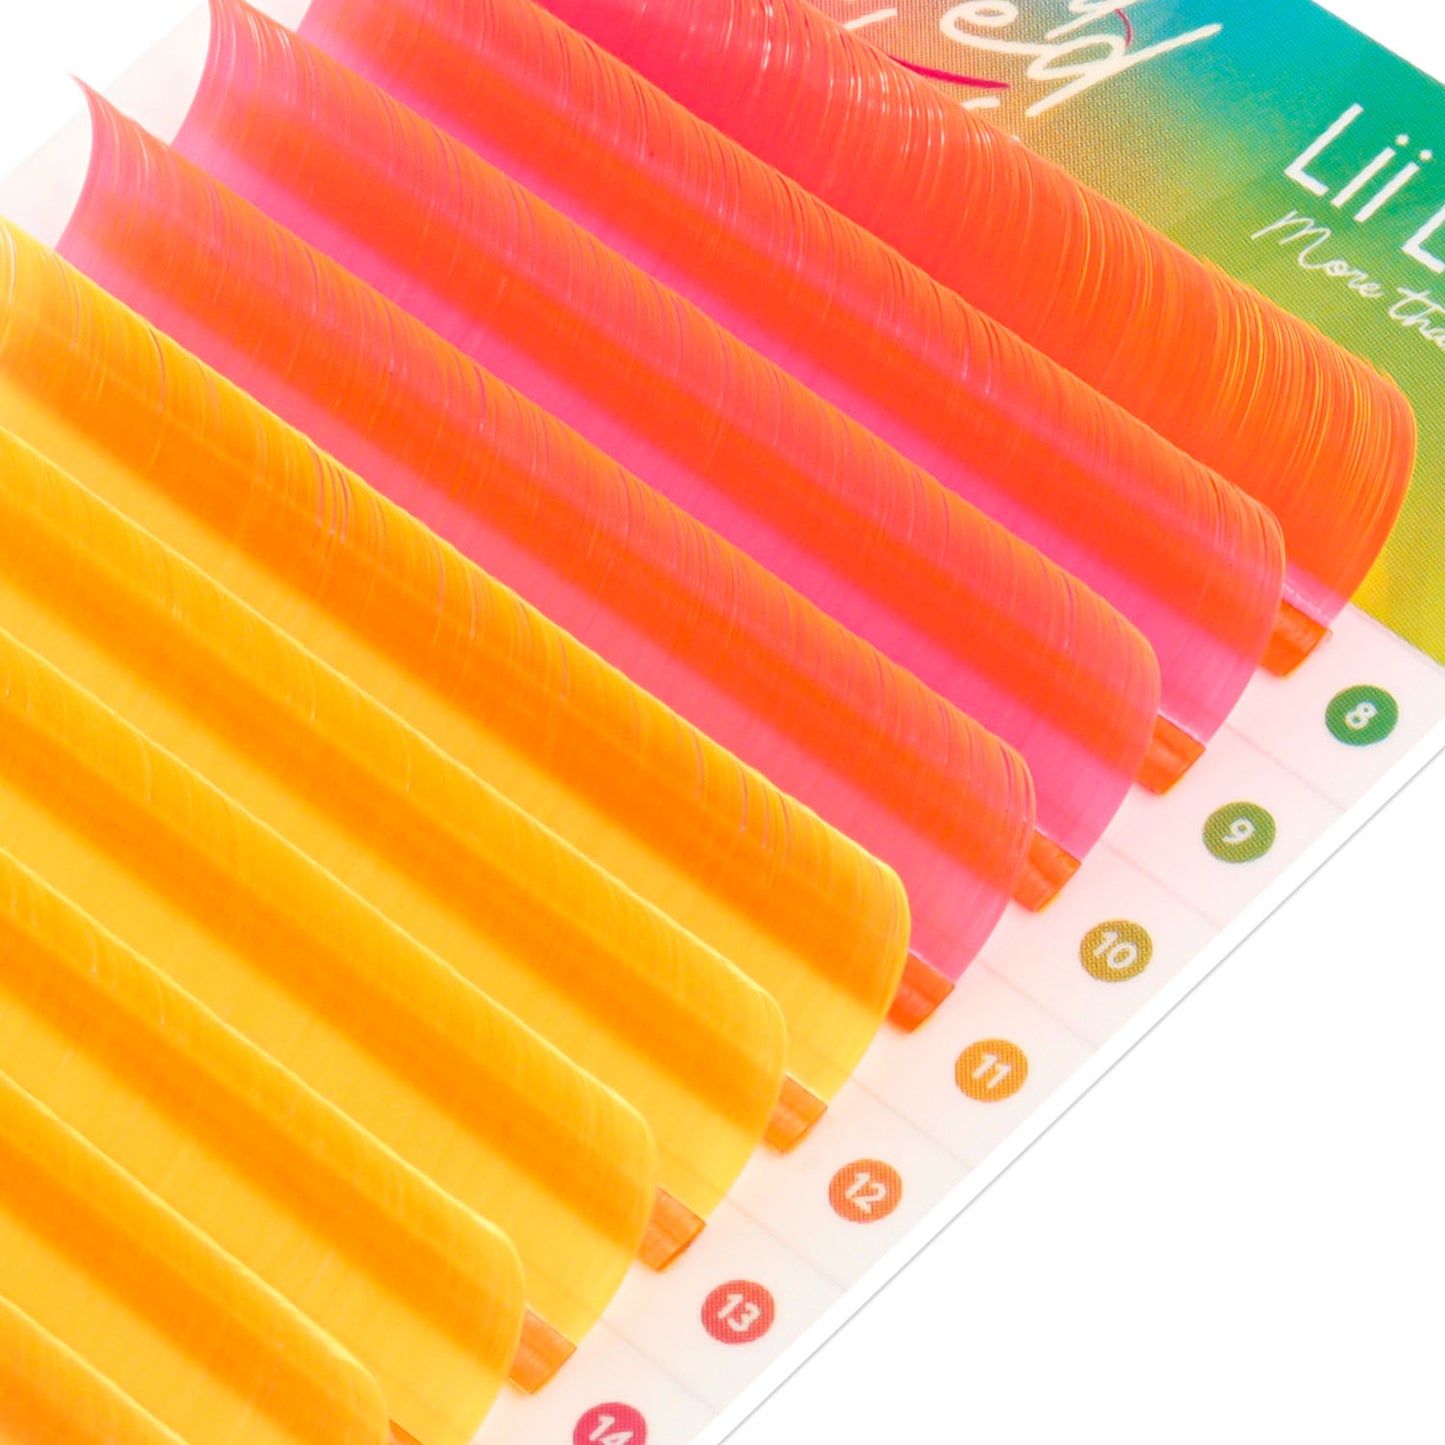 Pink-Grapefruit-and-Orange-mixed-colored-lashes-ultra-soft-ultra-lightweight